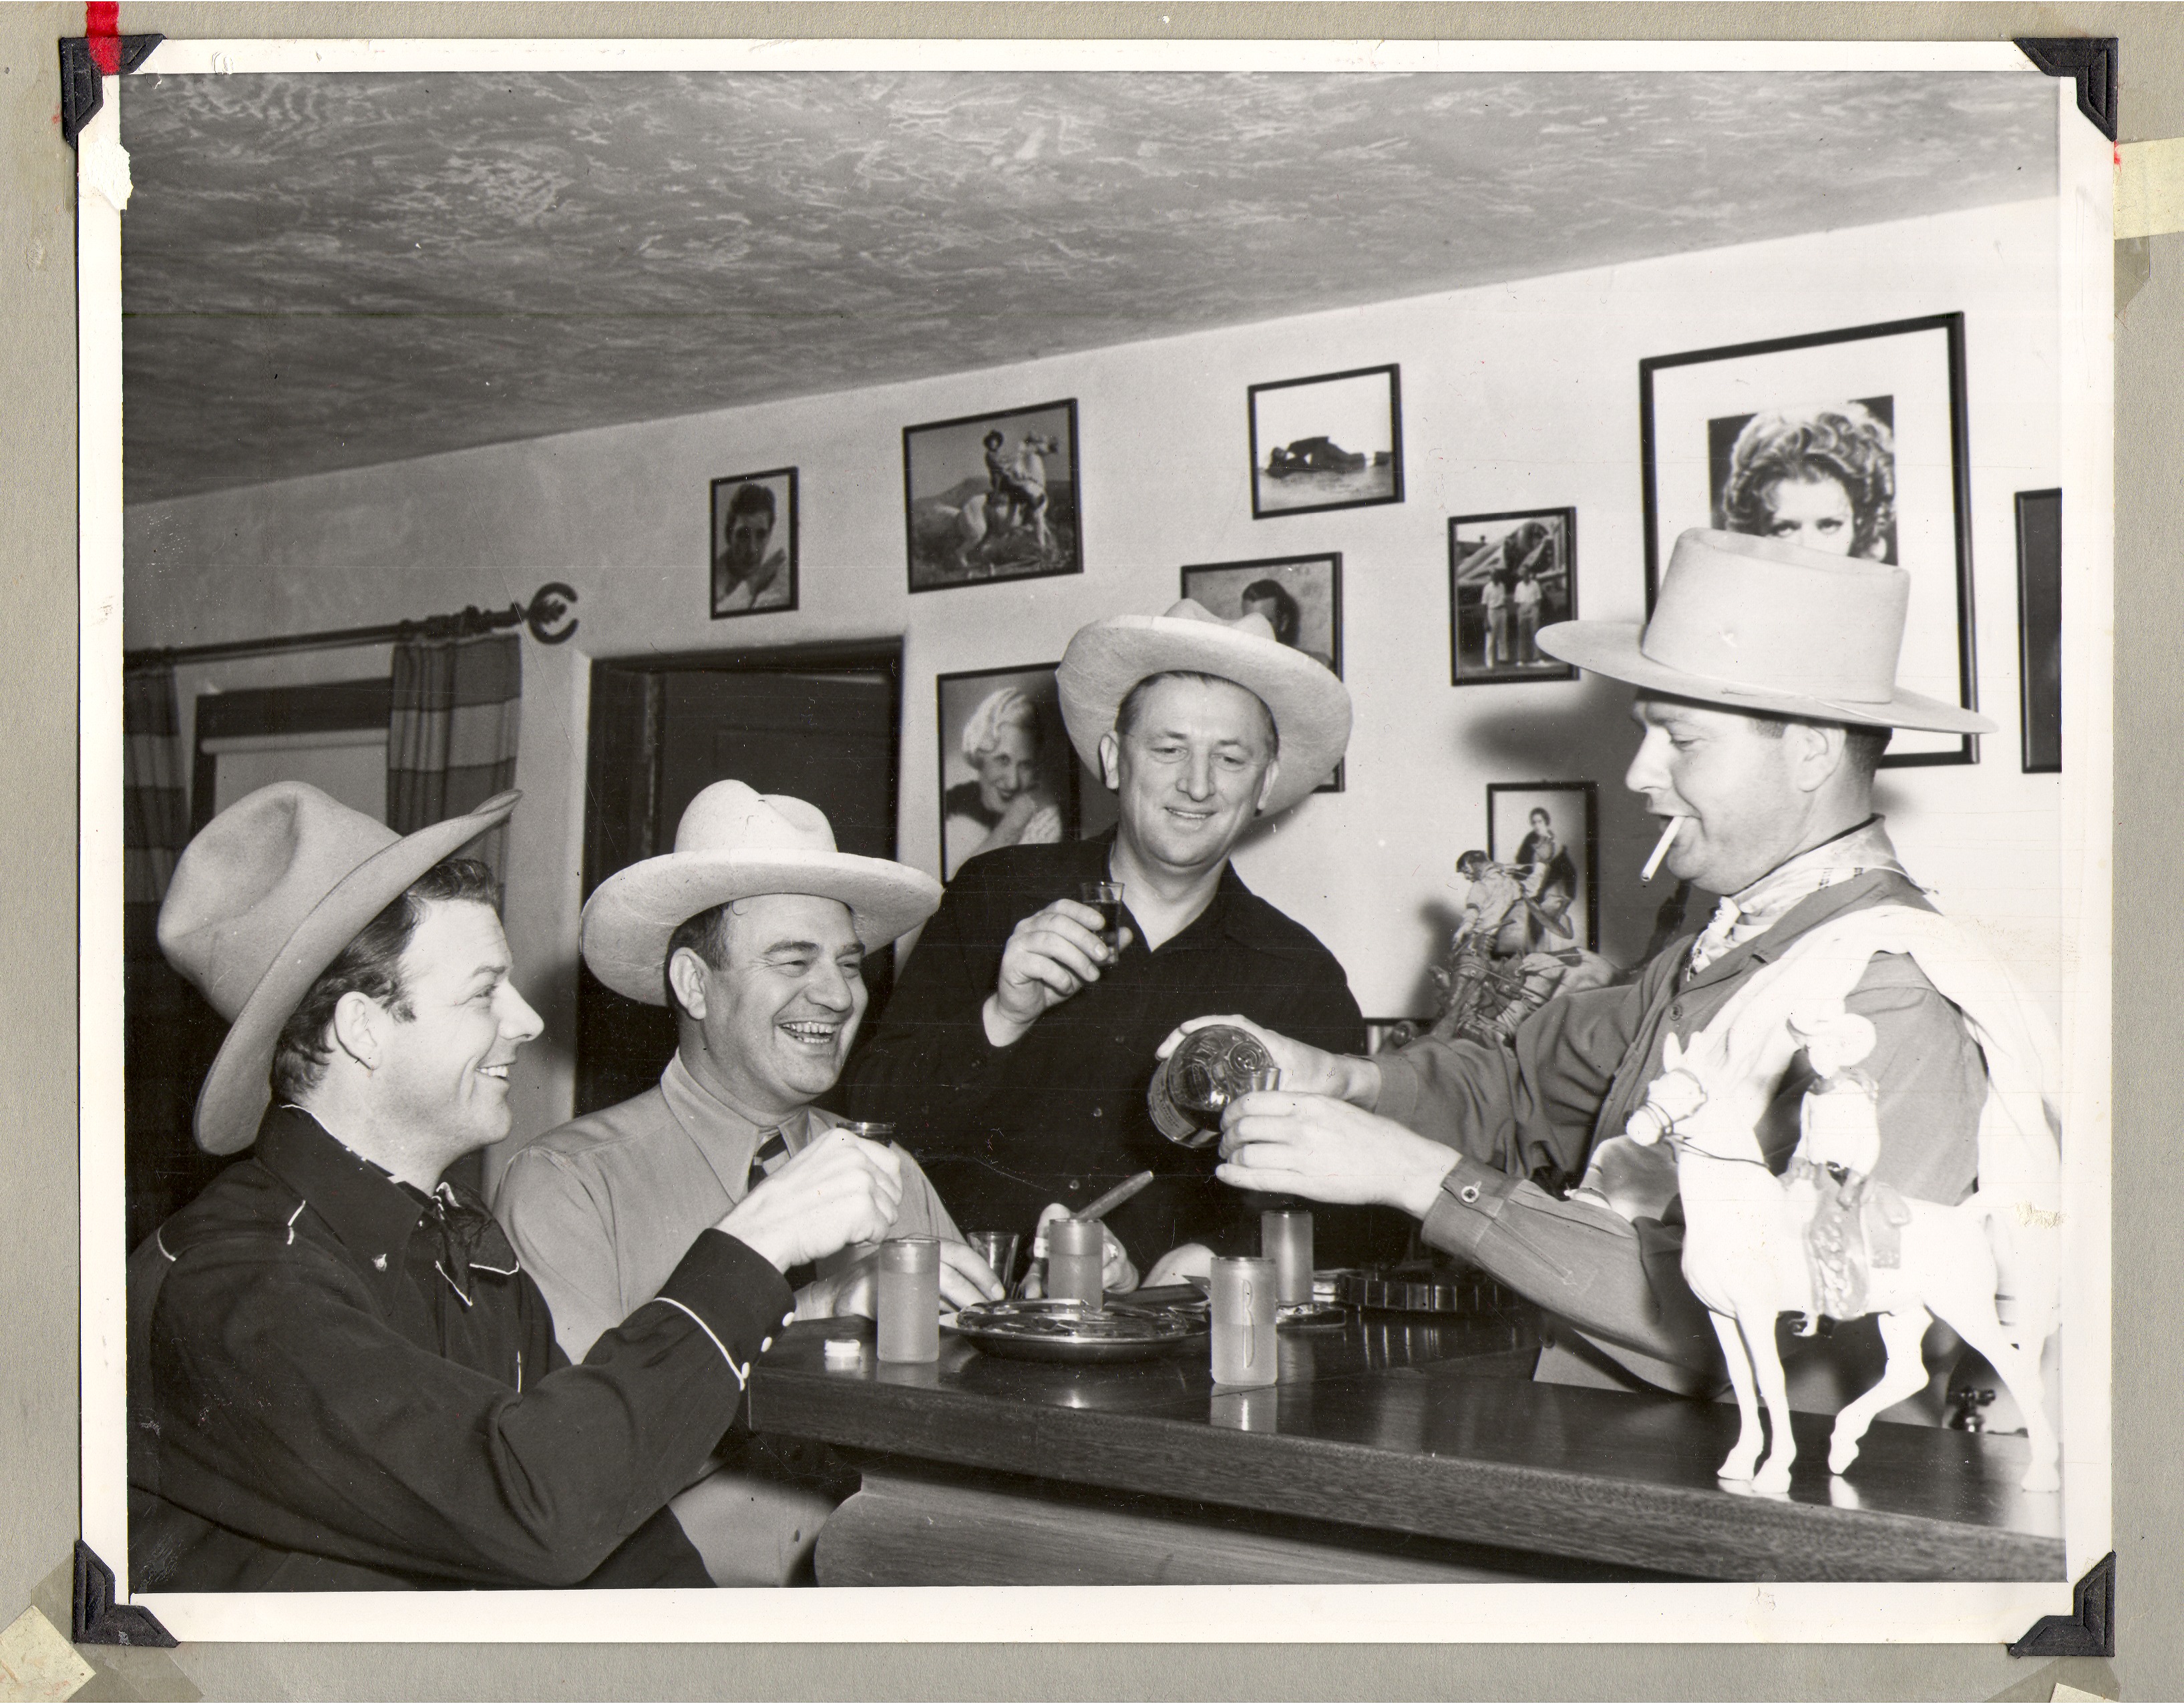 Rex Bell (left) with three other men at a bar: photographic print